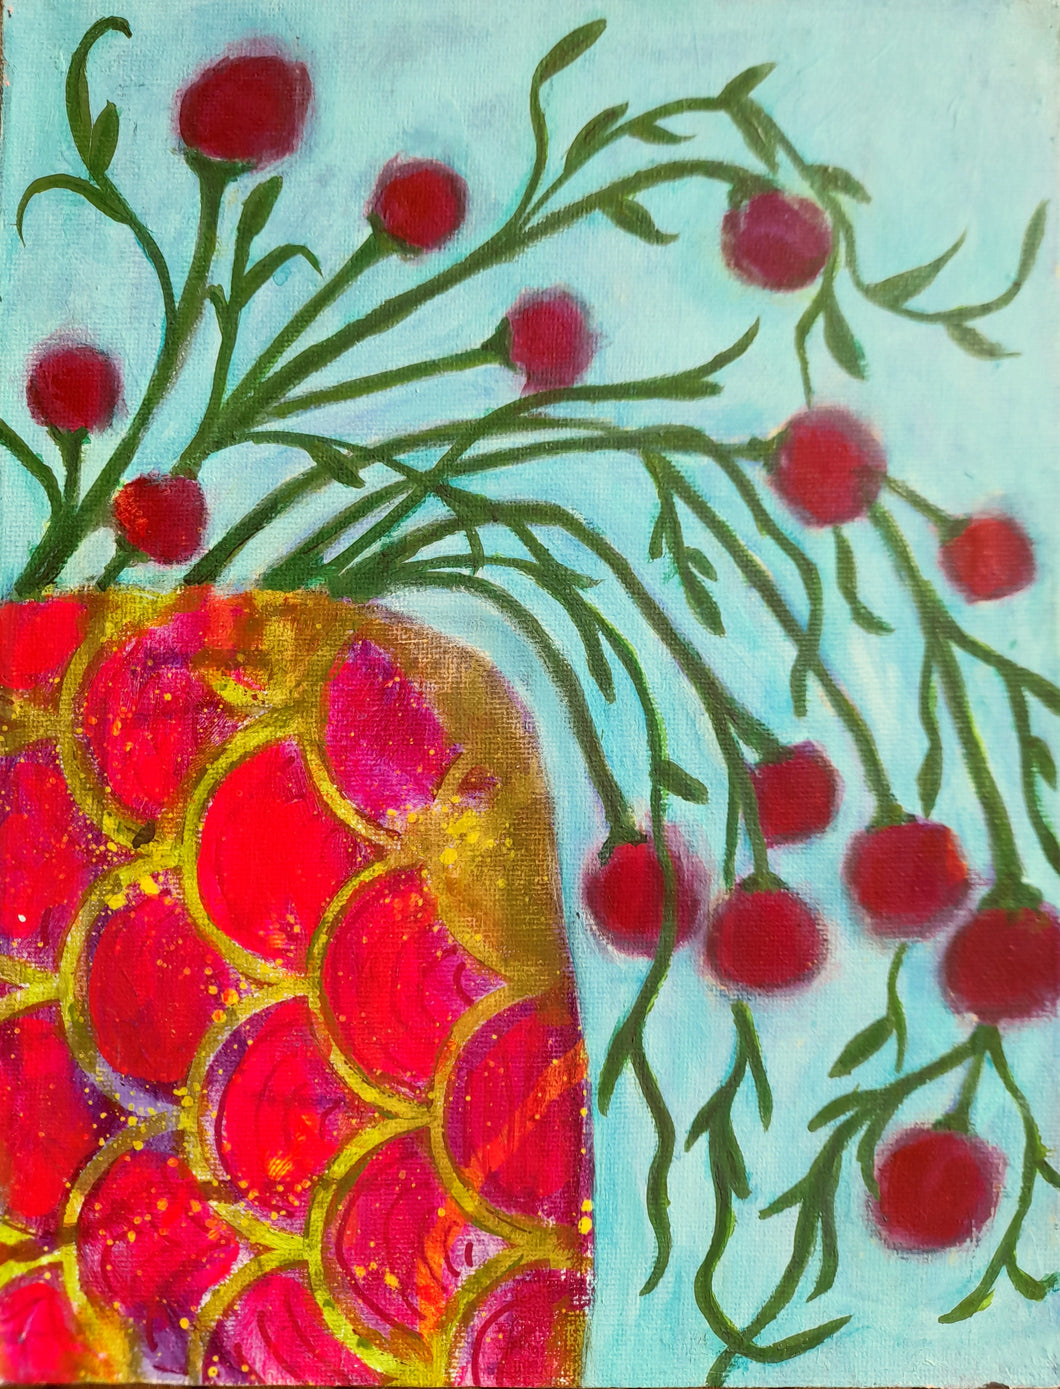 Pinky Buttons - Acrylic on Canvas 20x26cm